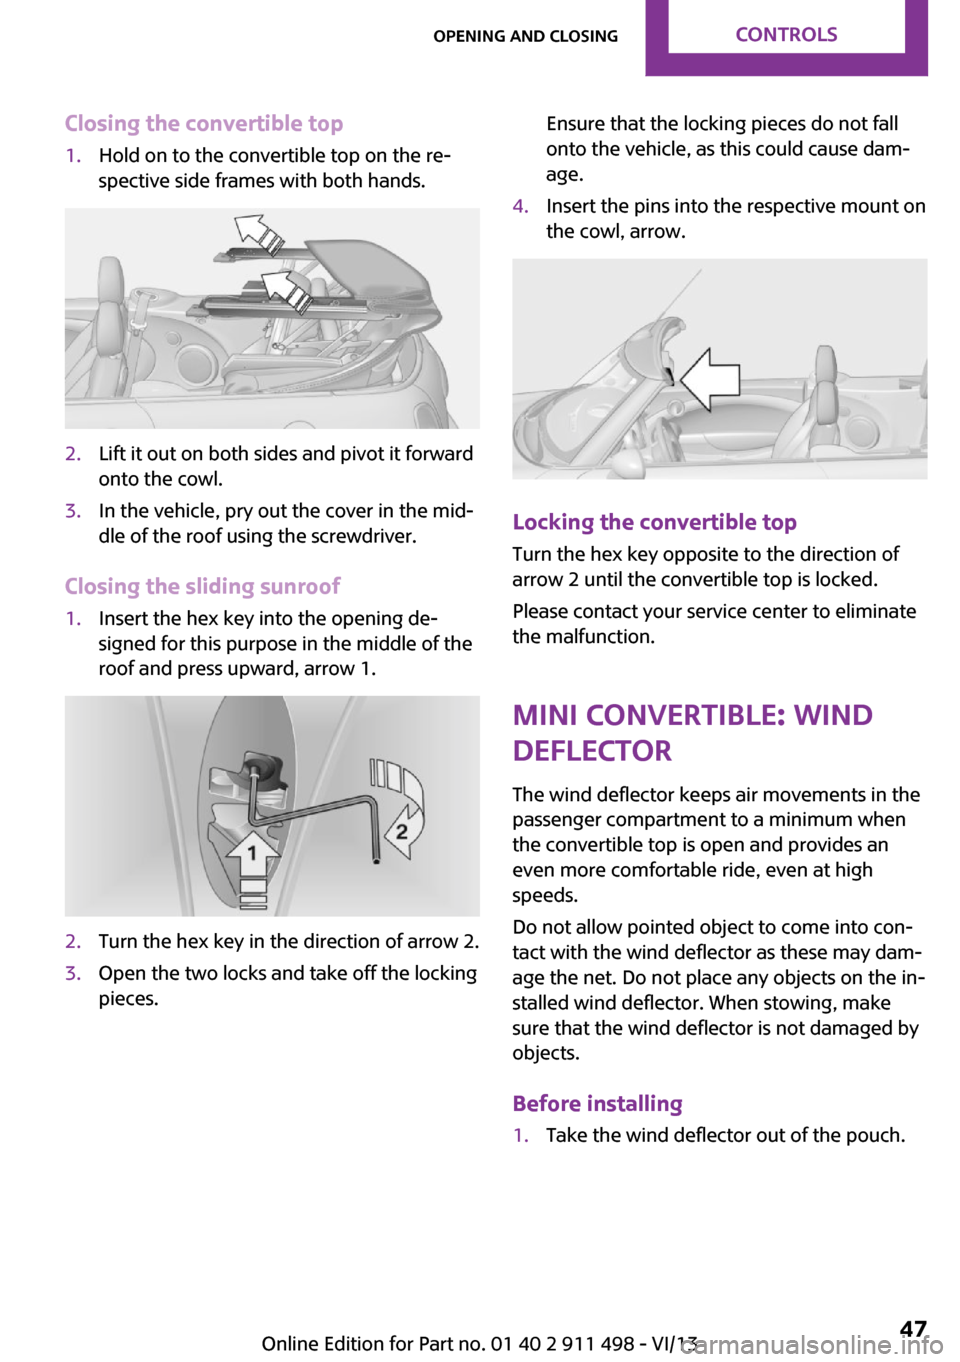 MINI Roadster 2014  Owners Manual (Mini Connected) Closing the convertible top1.Hold on to the convertible top on the re‐
spective side frames with both hands.2.Lift it out on both sides and pivot it forward
onto the cowl.3.In the vehicle, pry out t